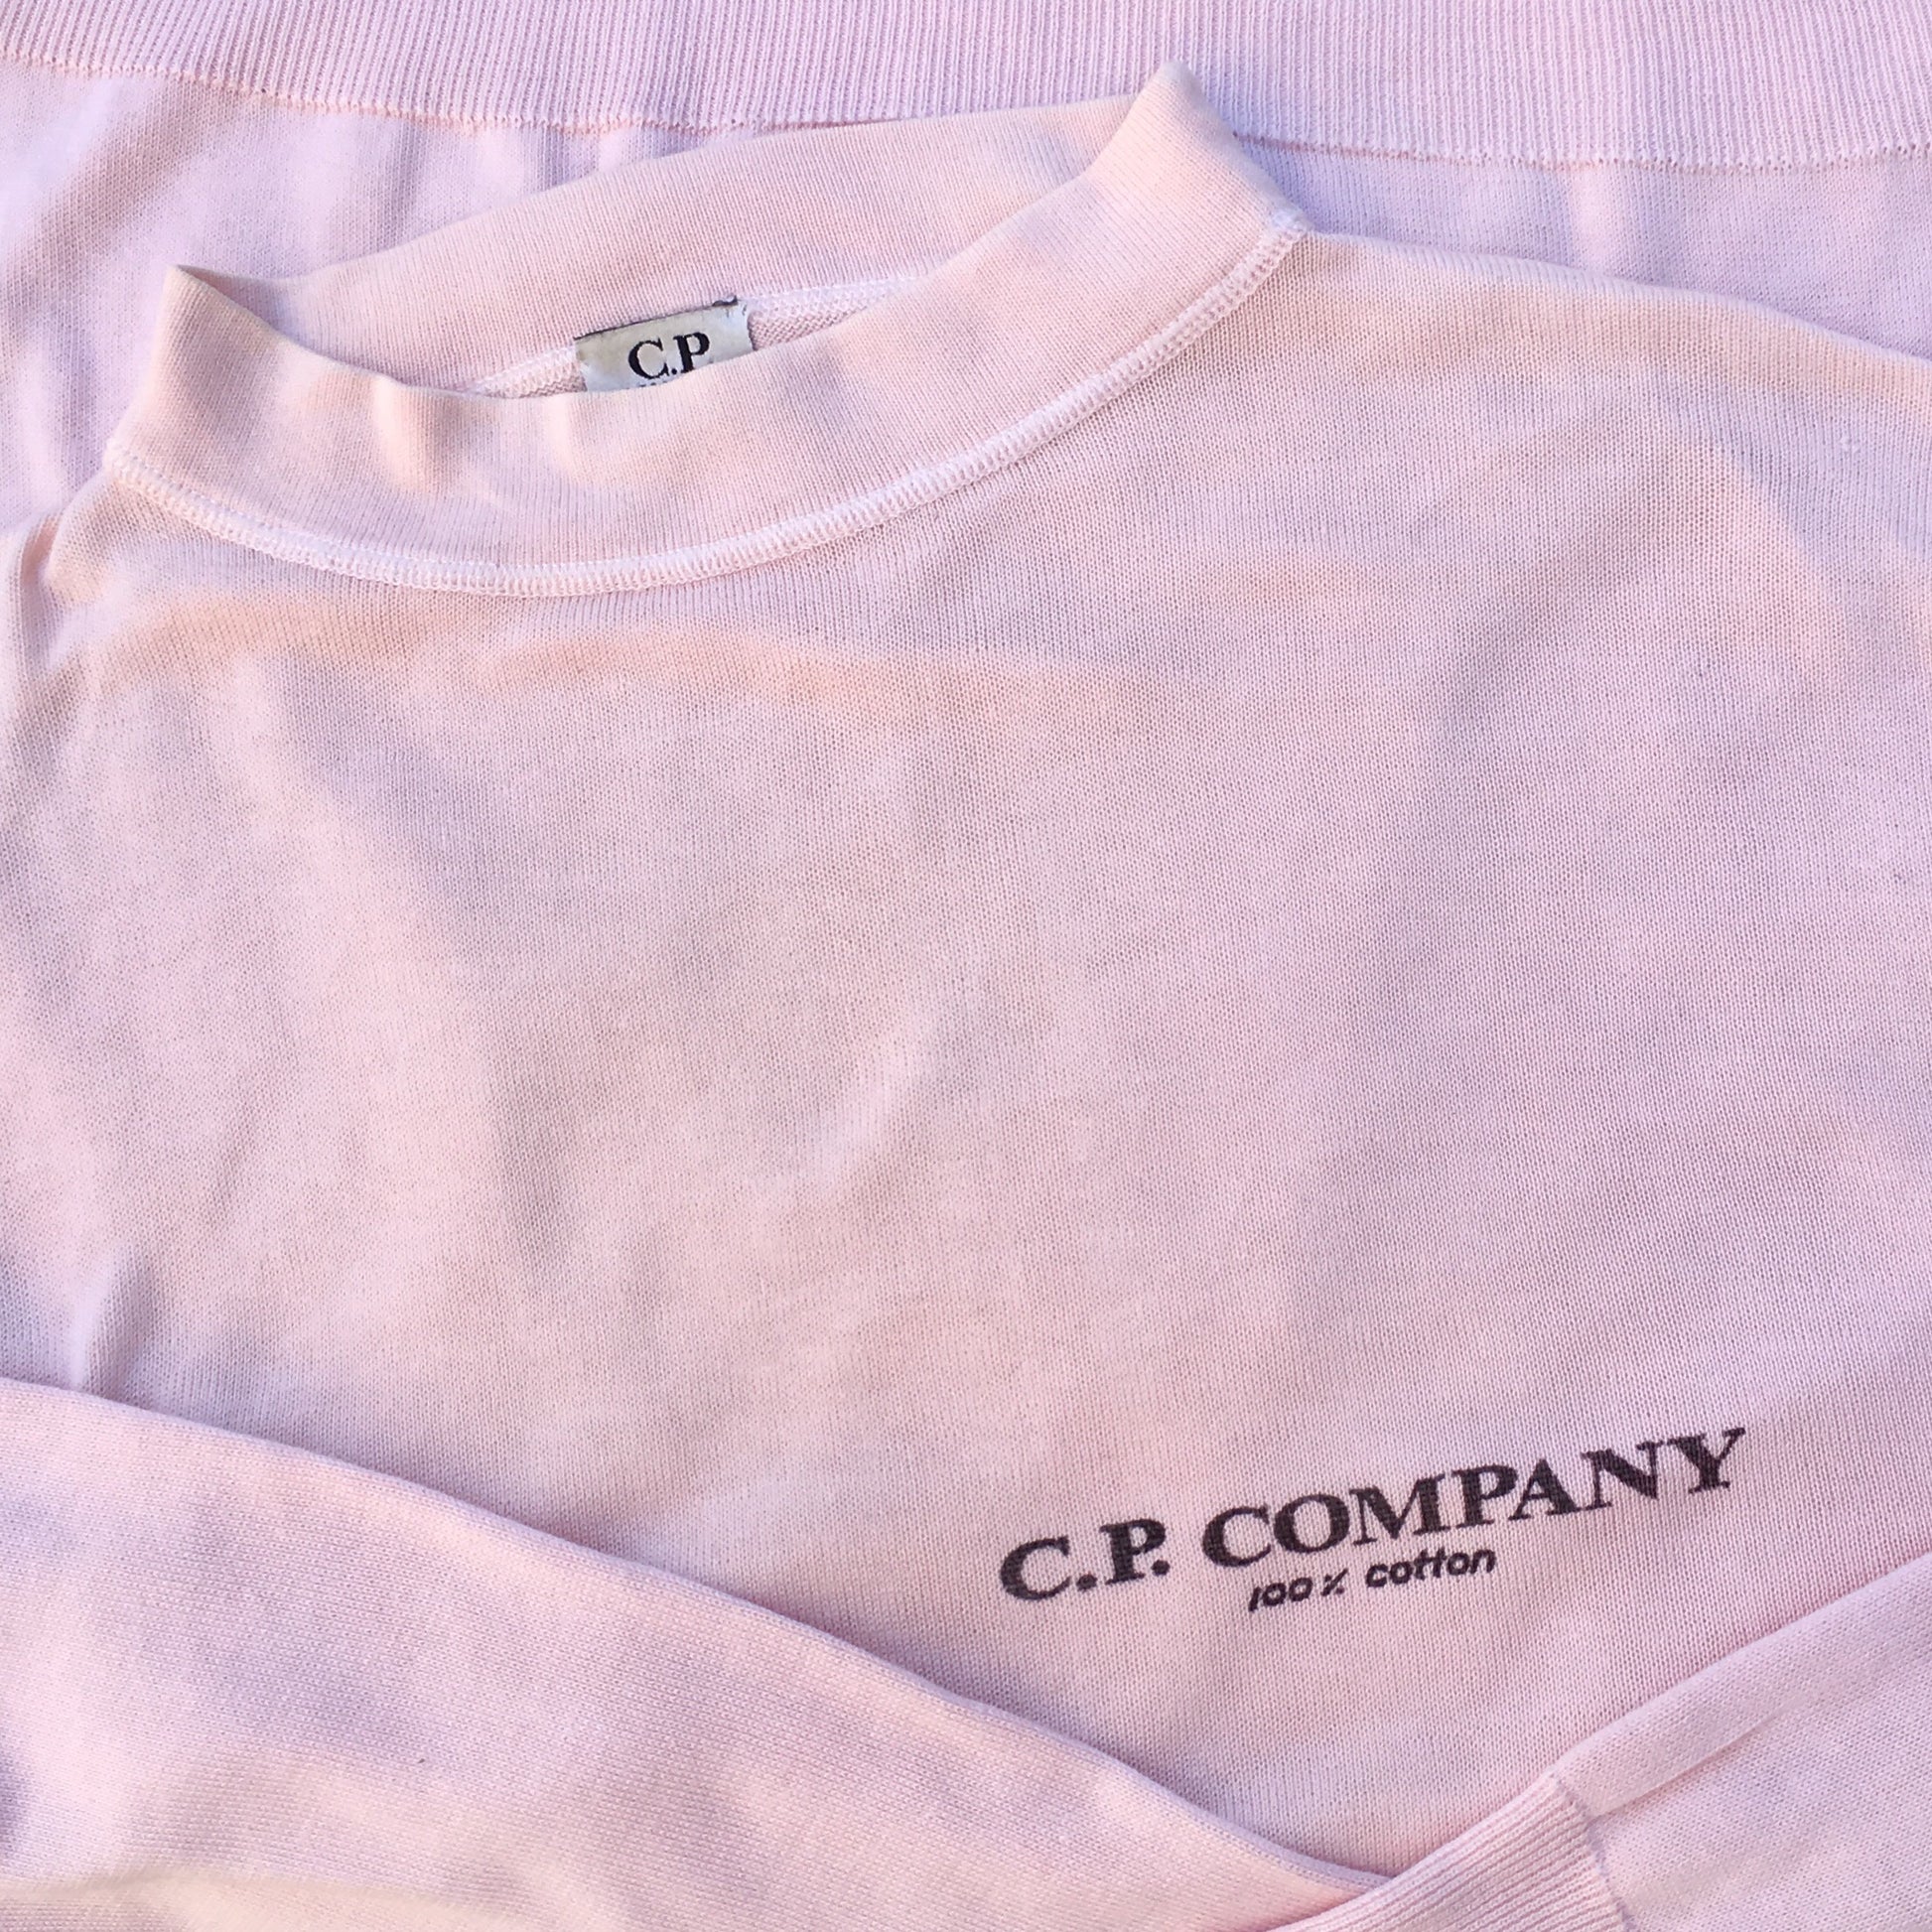 vintage C.P. Company SS 90s Cotton Sweater by Massimo Osti